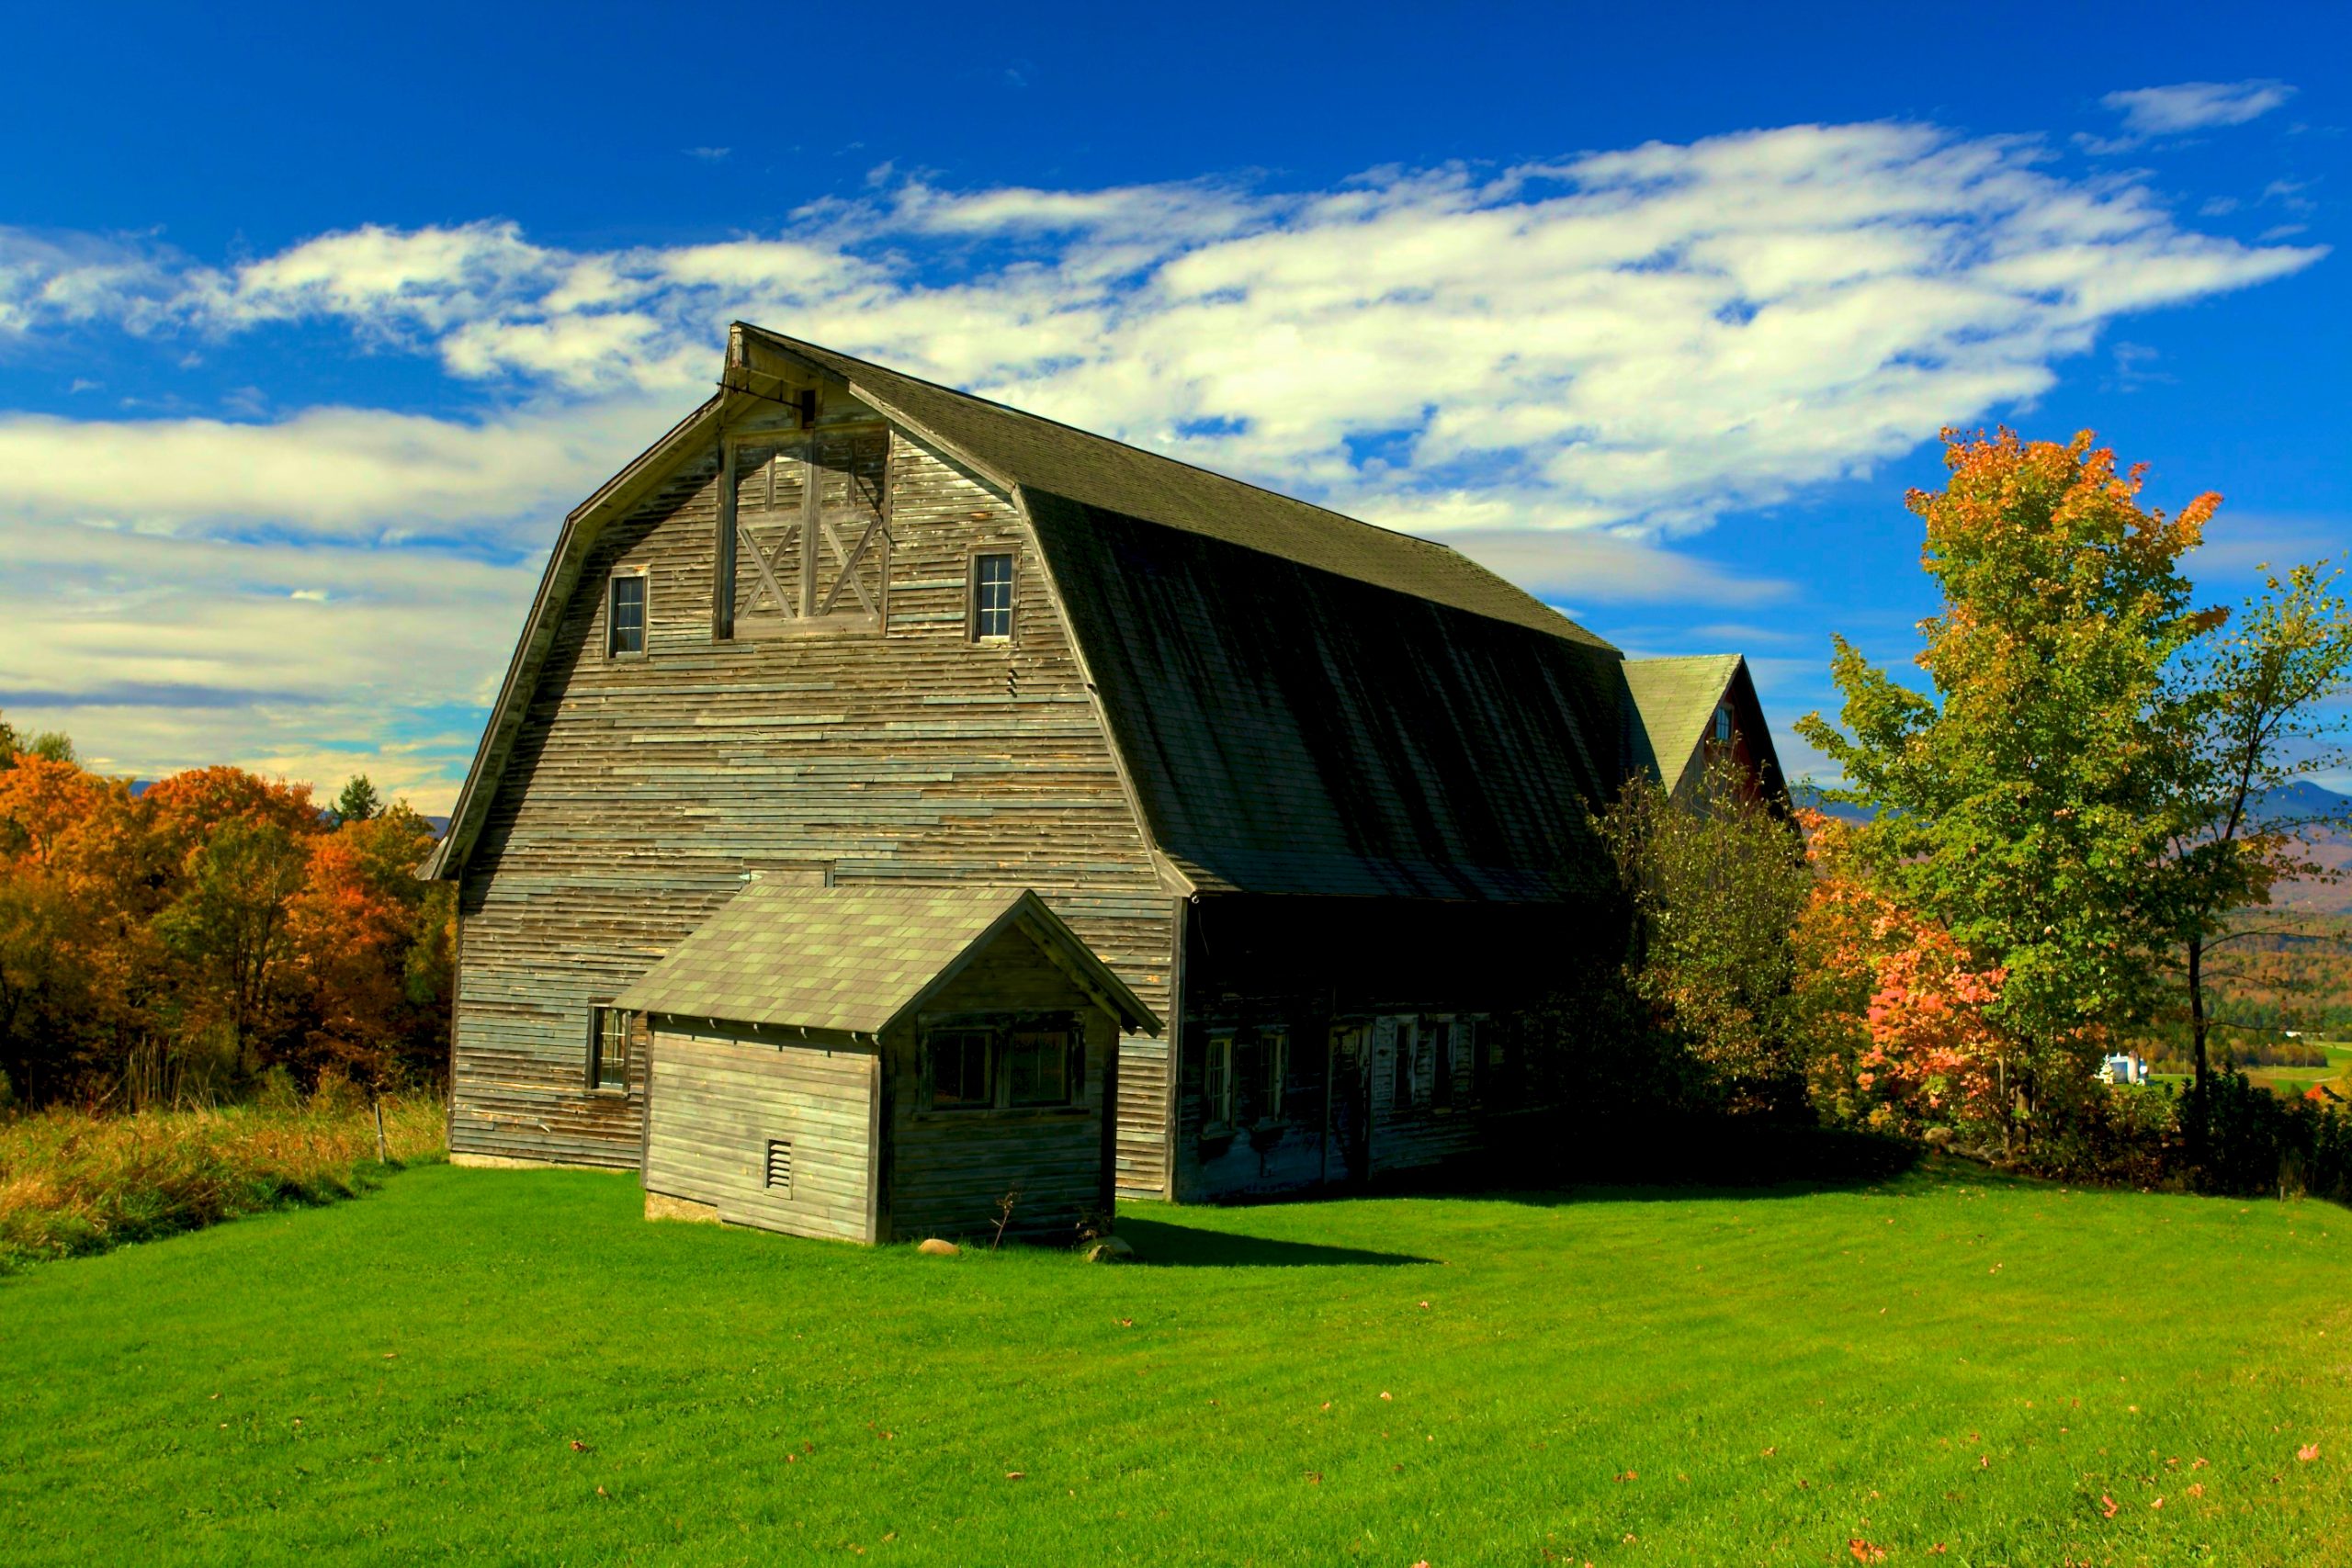 Stowe Barn (user submitted)